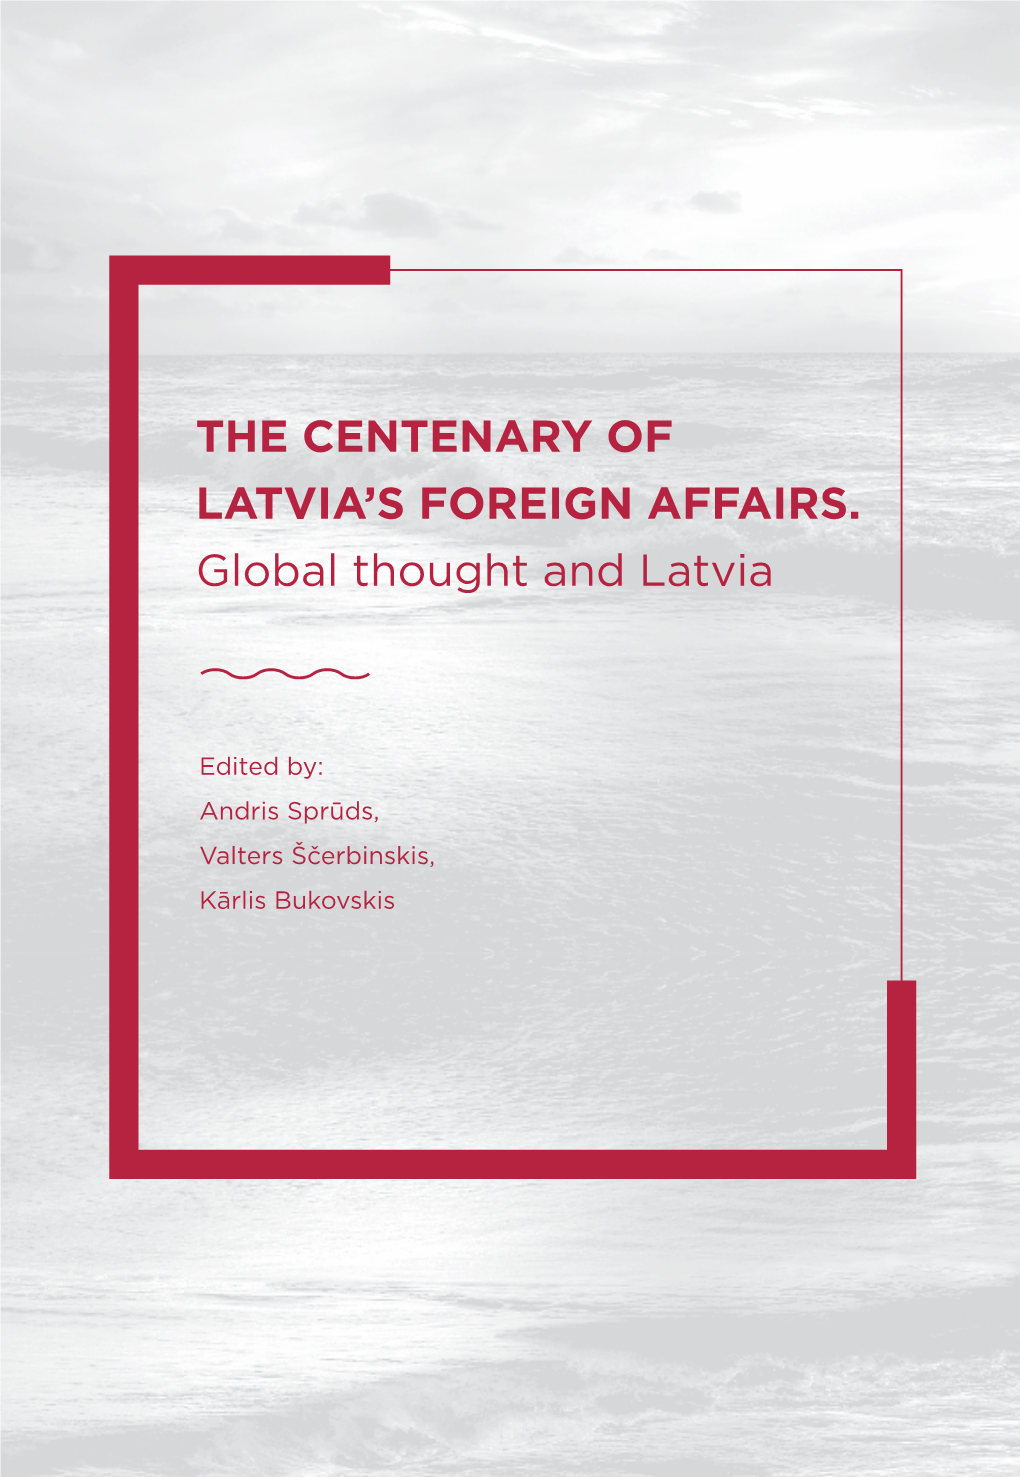 THE CENTENARY of LATVIA's FOREIGN AFFAIRS. Global Thought and Latvia